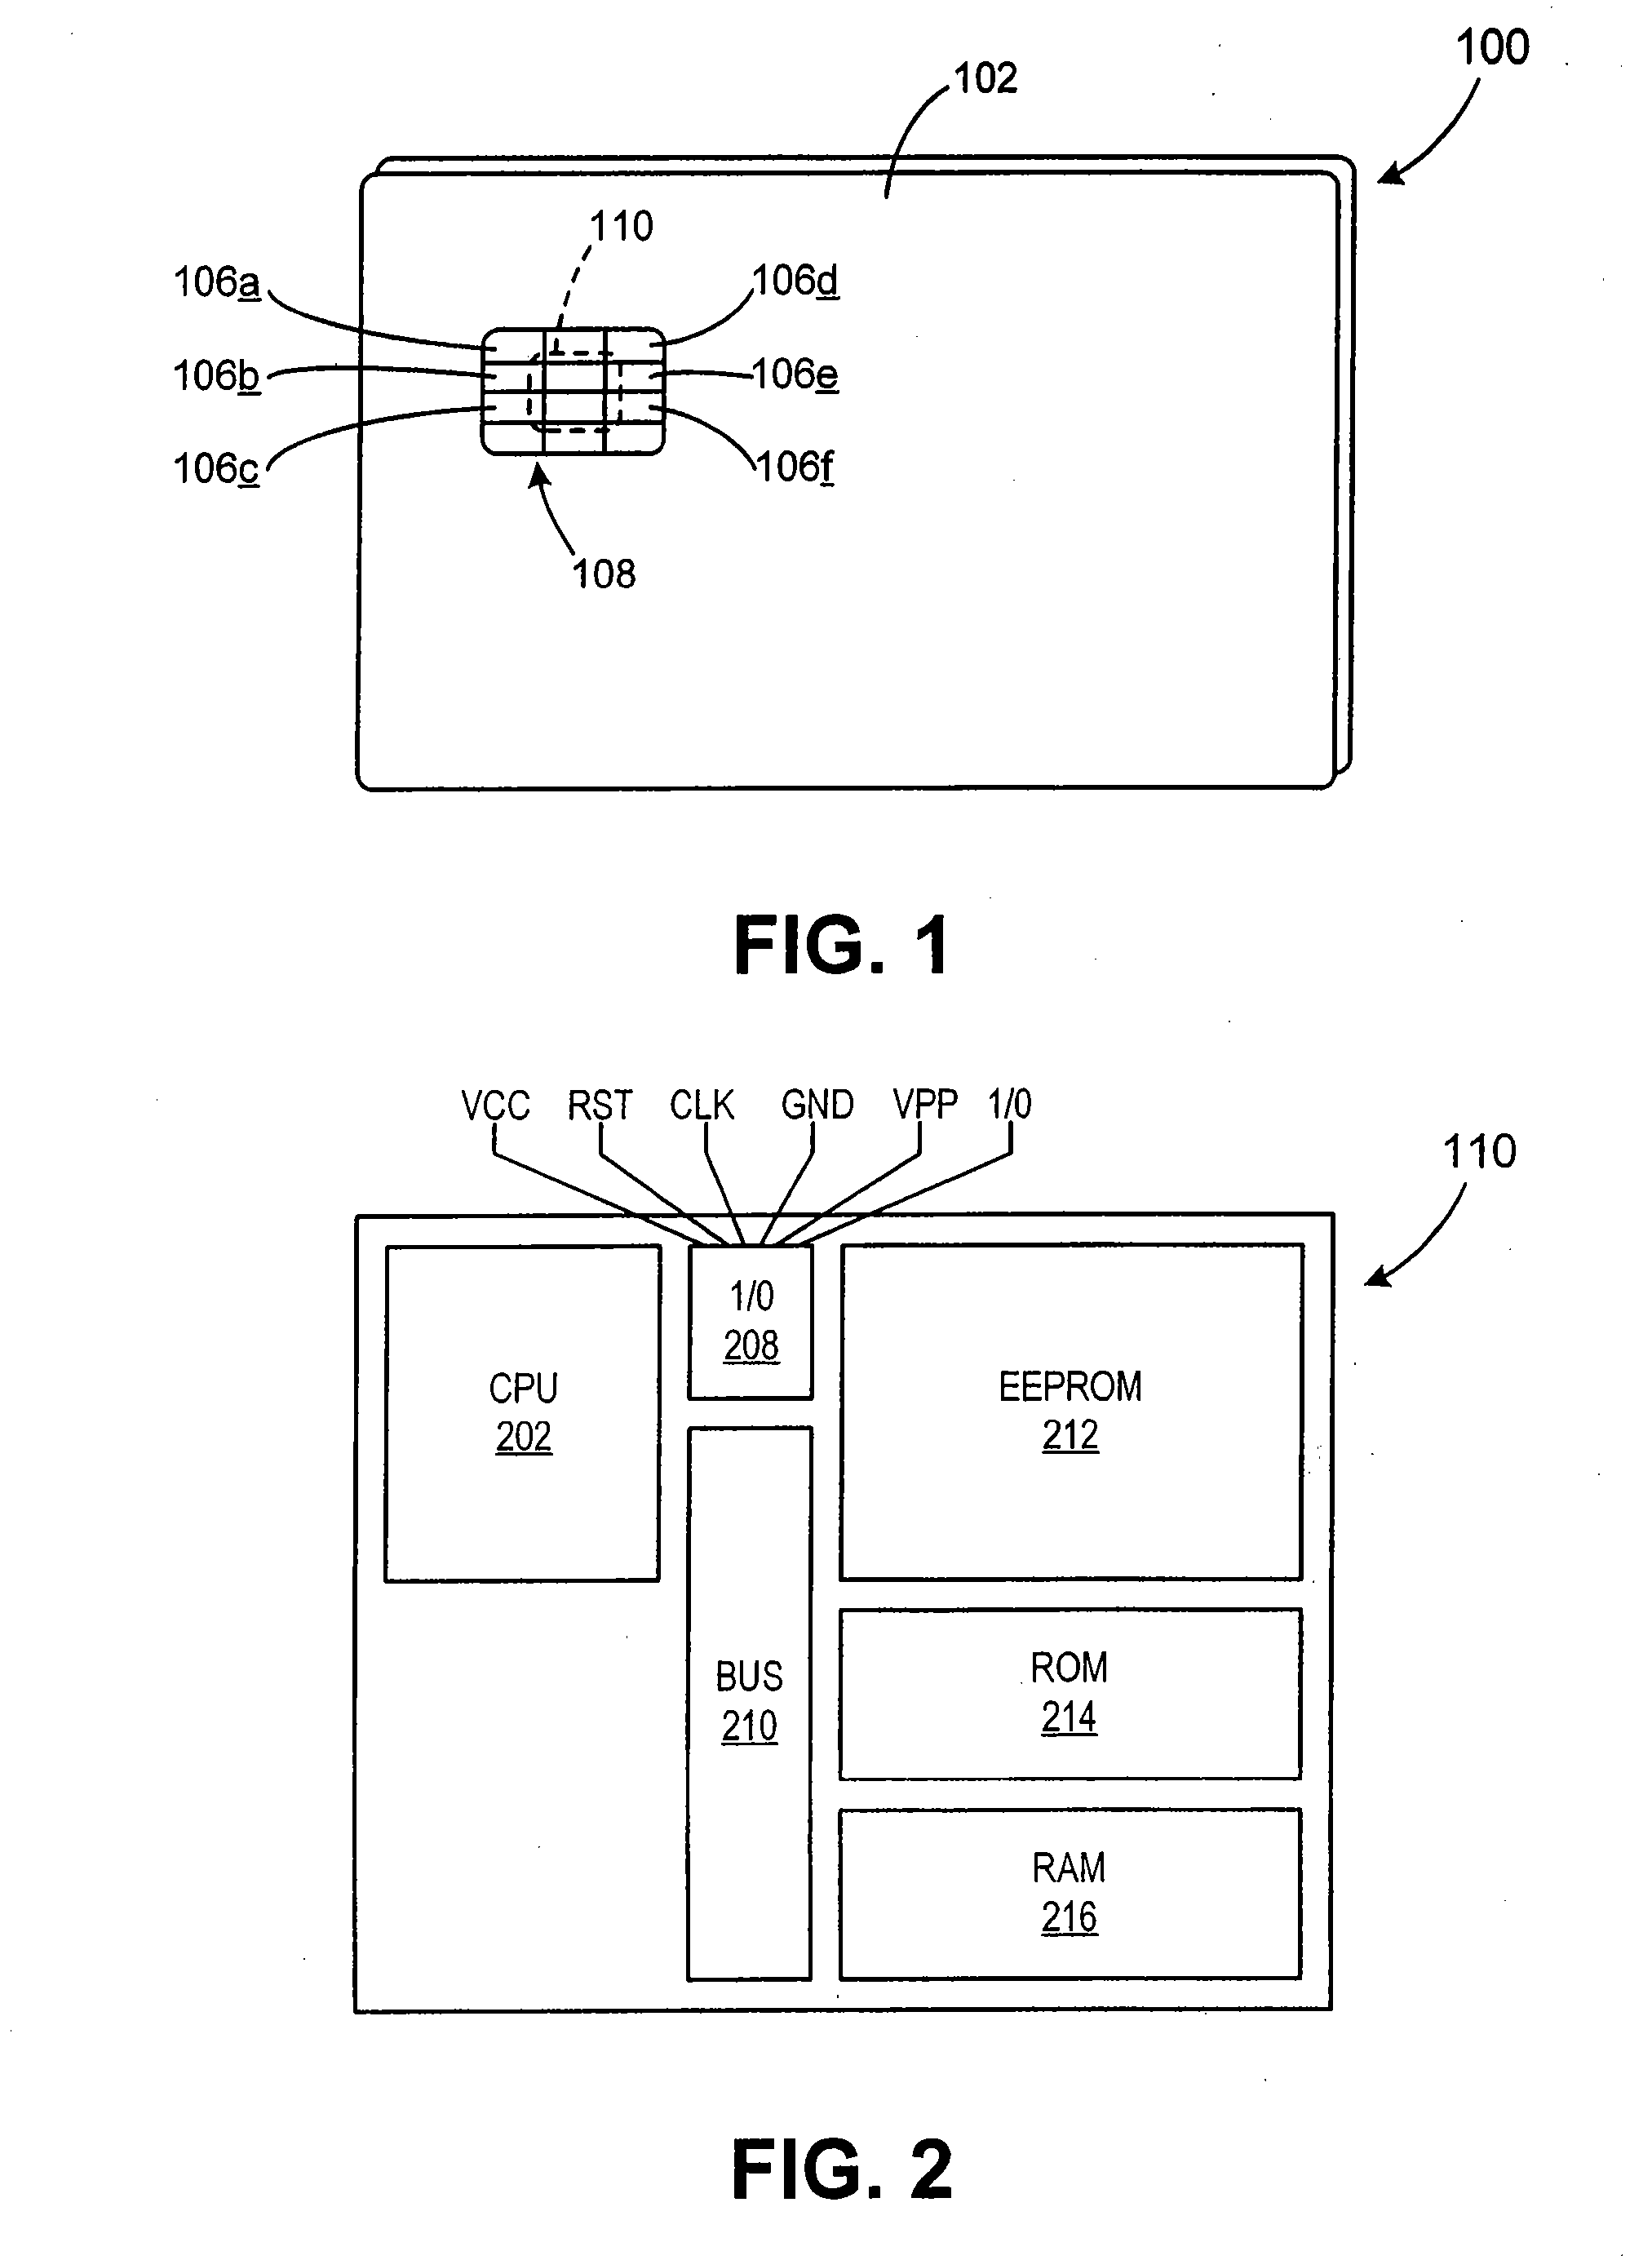 Method and system for keystroke scan recognition biometrics on a smartcard